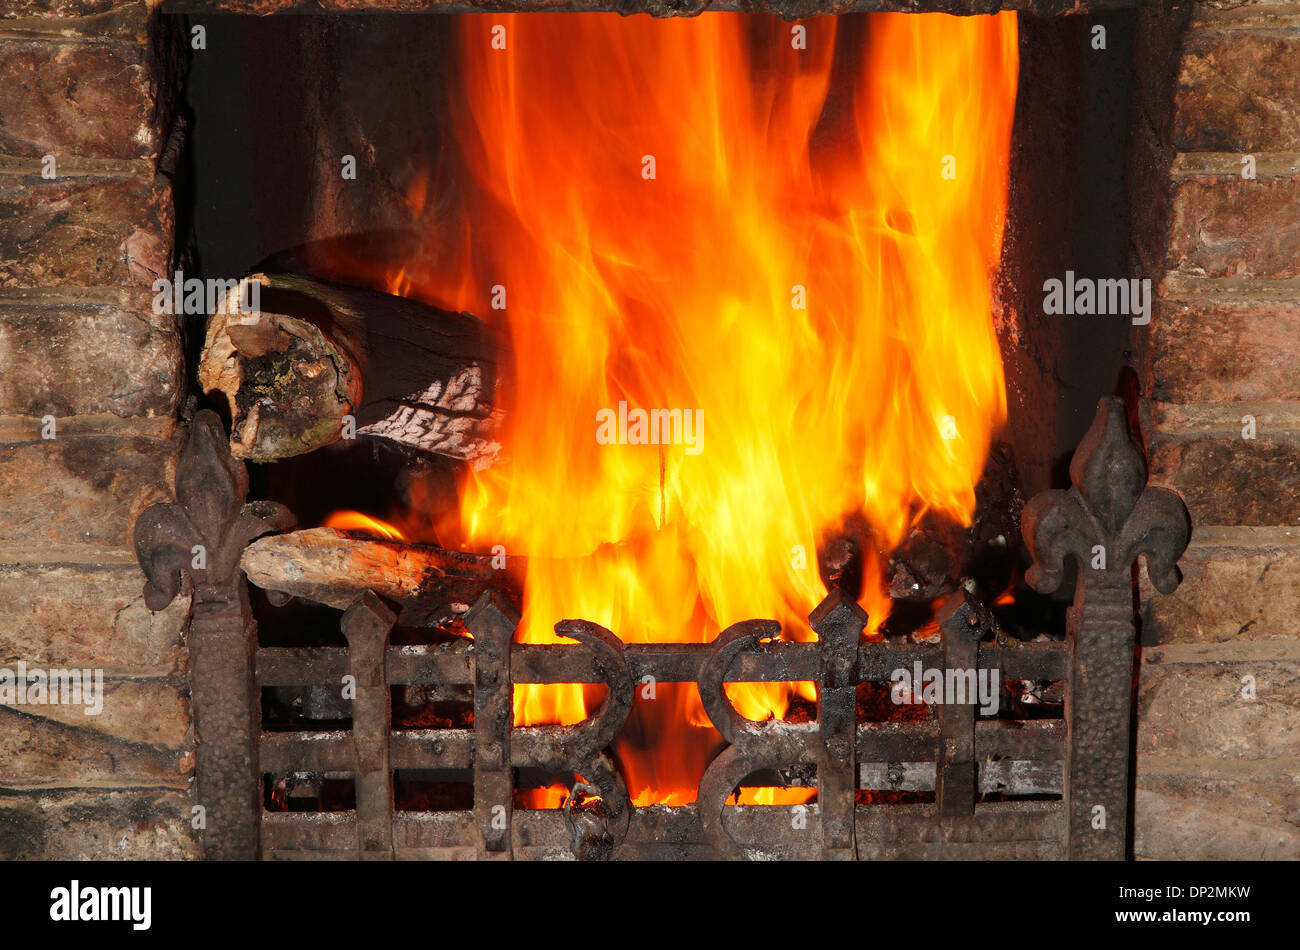 Fire in domestic hearth, heat flame flames heating fireside warmth fires grate burning wood coal home fires Stock Photo